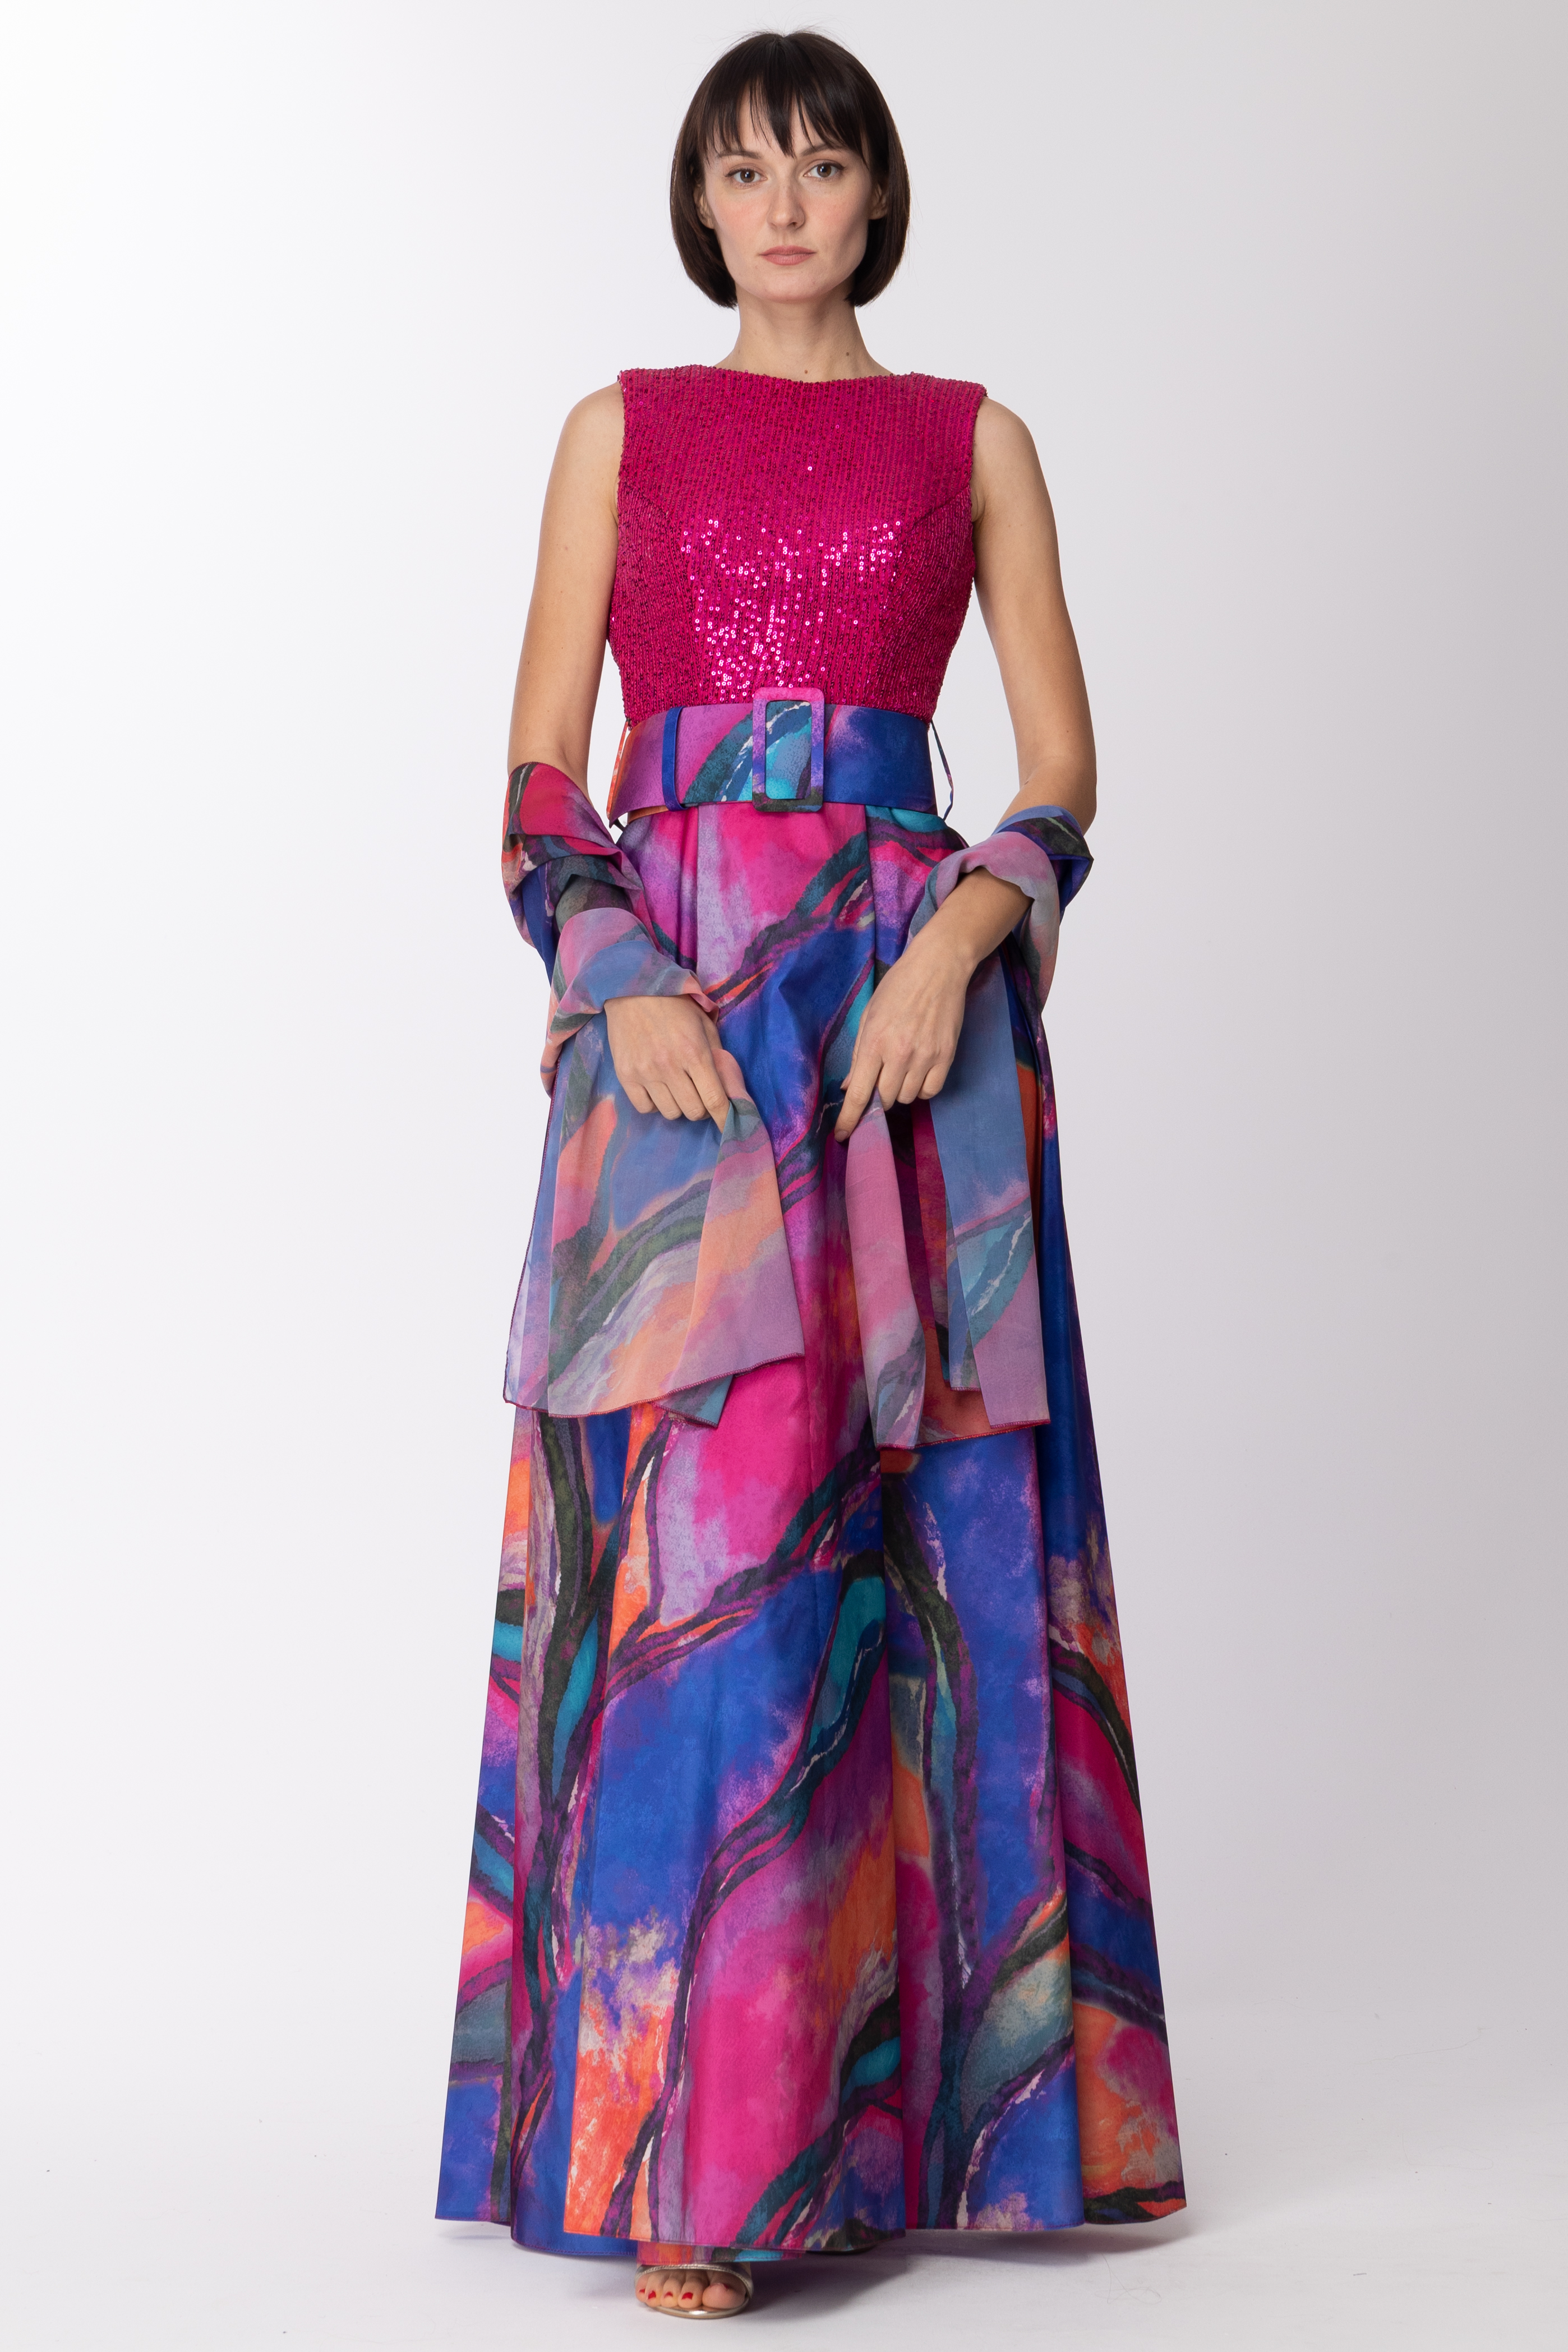 Preview: Fabiana Ferri Long dress with embroidered top and patterned skirt Fantasia